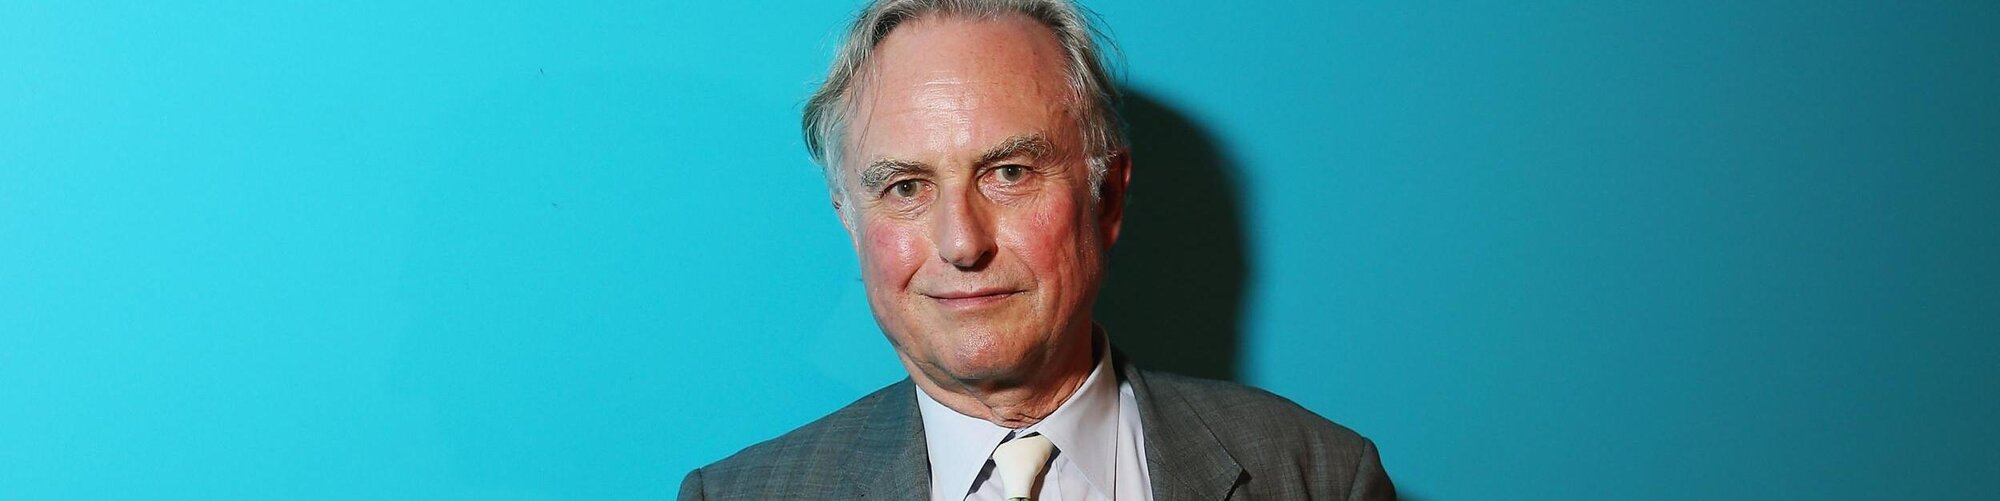 Richard Dawkins - The Ultimate Collection's background image'